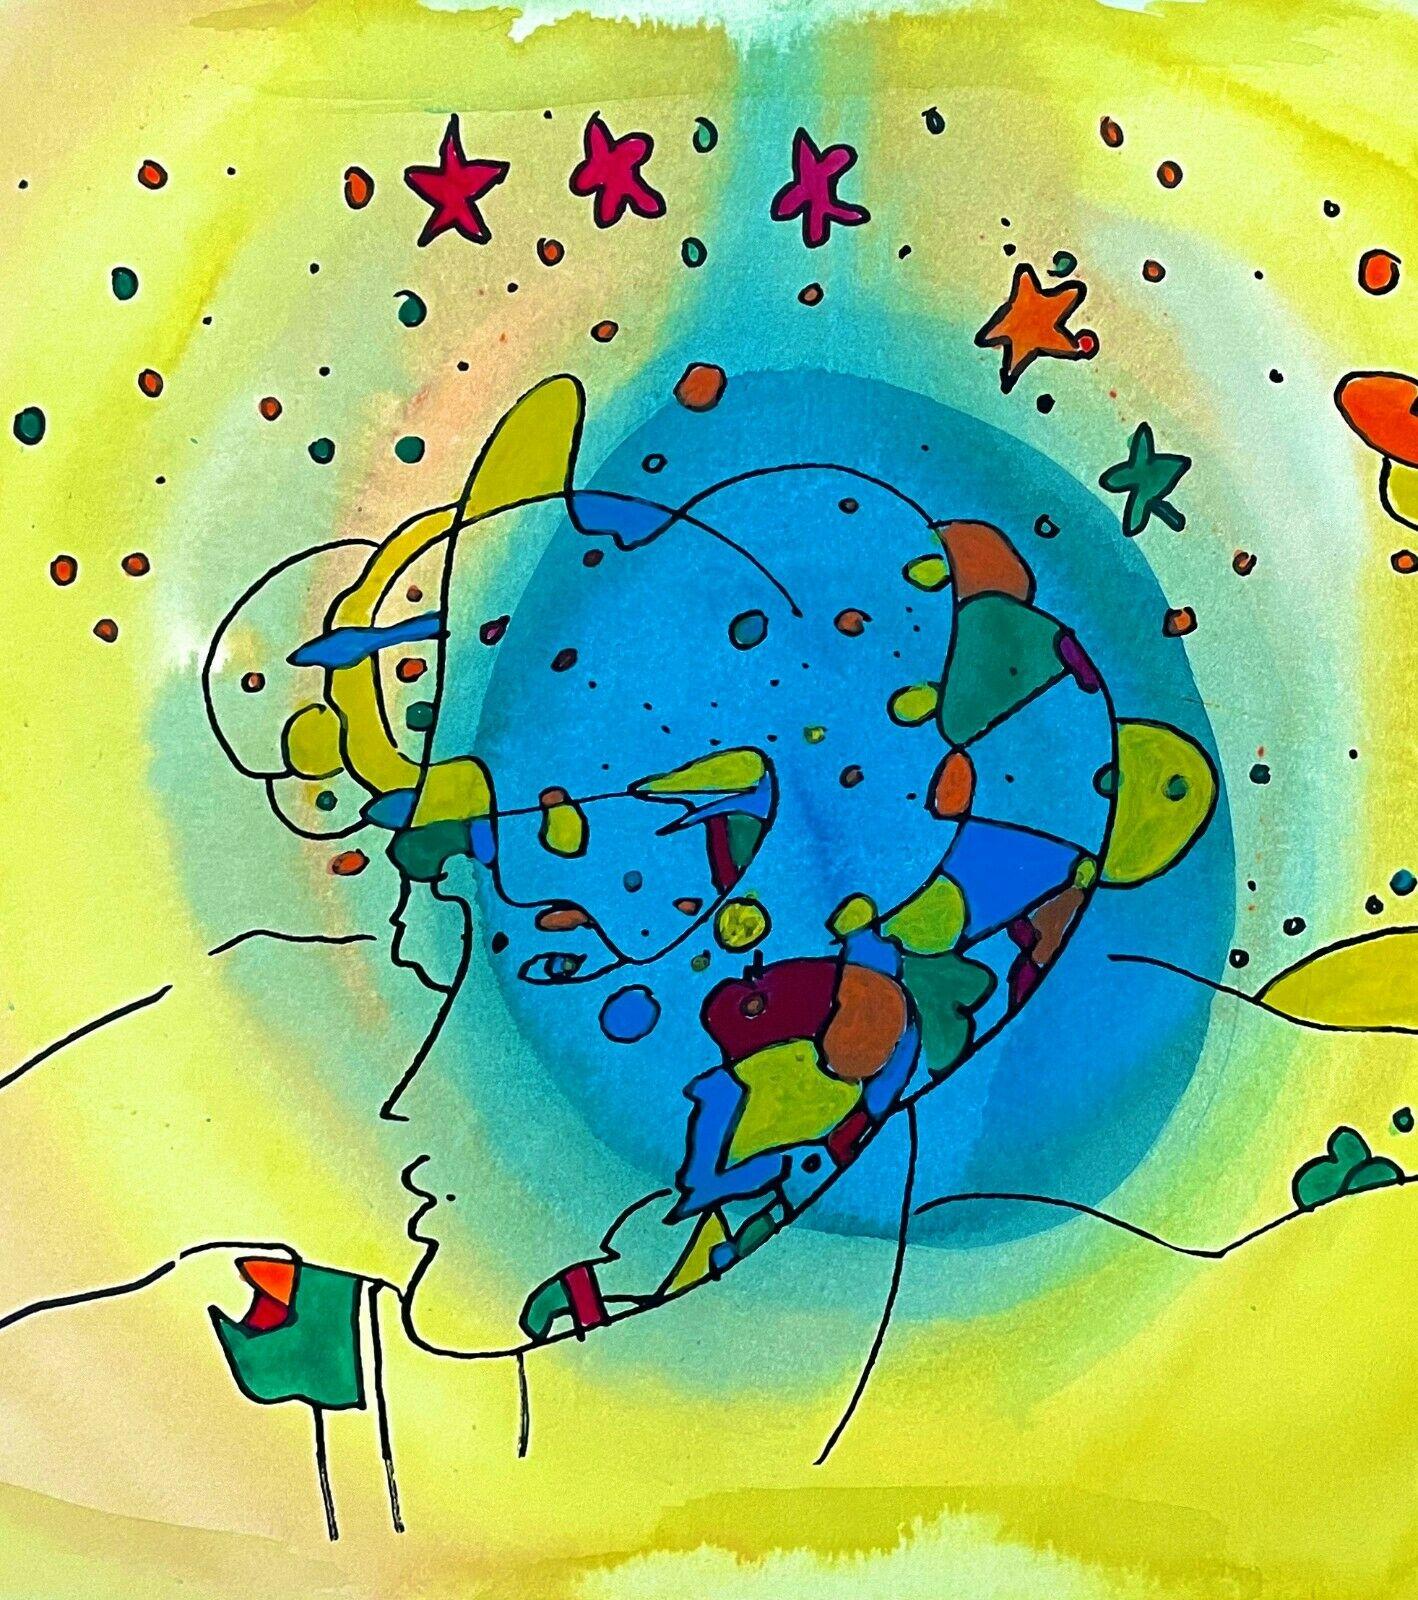 Artist: Peter Max (1937)
Title: Galaxy Profile
Year: circa 1998
Medium: Silkscreen and watercolor on Arches paper
Size: 11 x 15 inches
Condition: Excellent
Inscription: Signed in permanent marker.

PETER MAX (1937- ) Peter Max has achieved huge